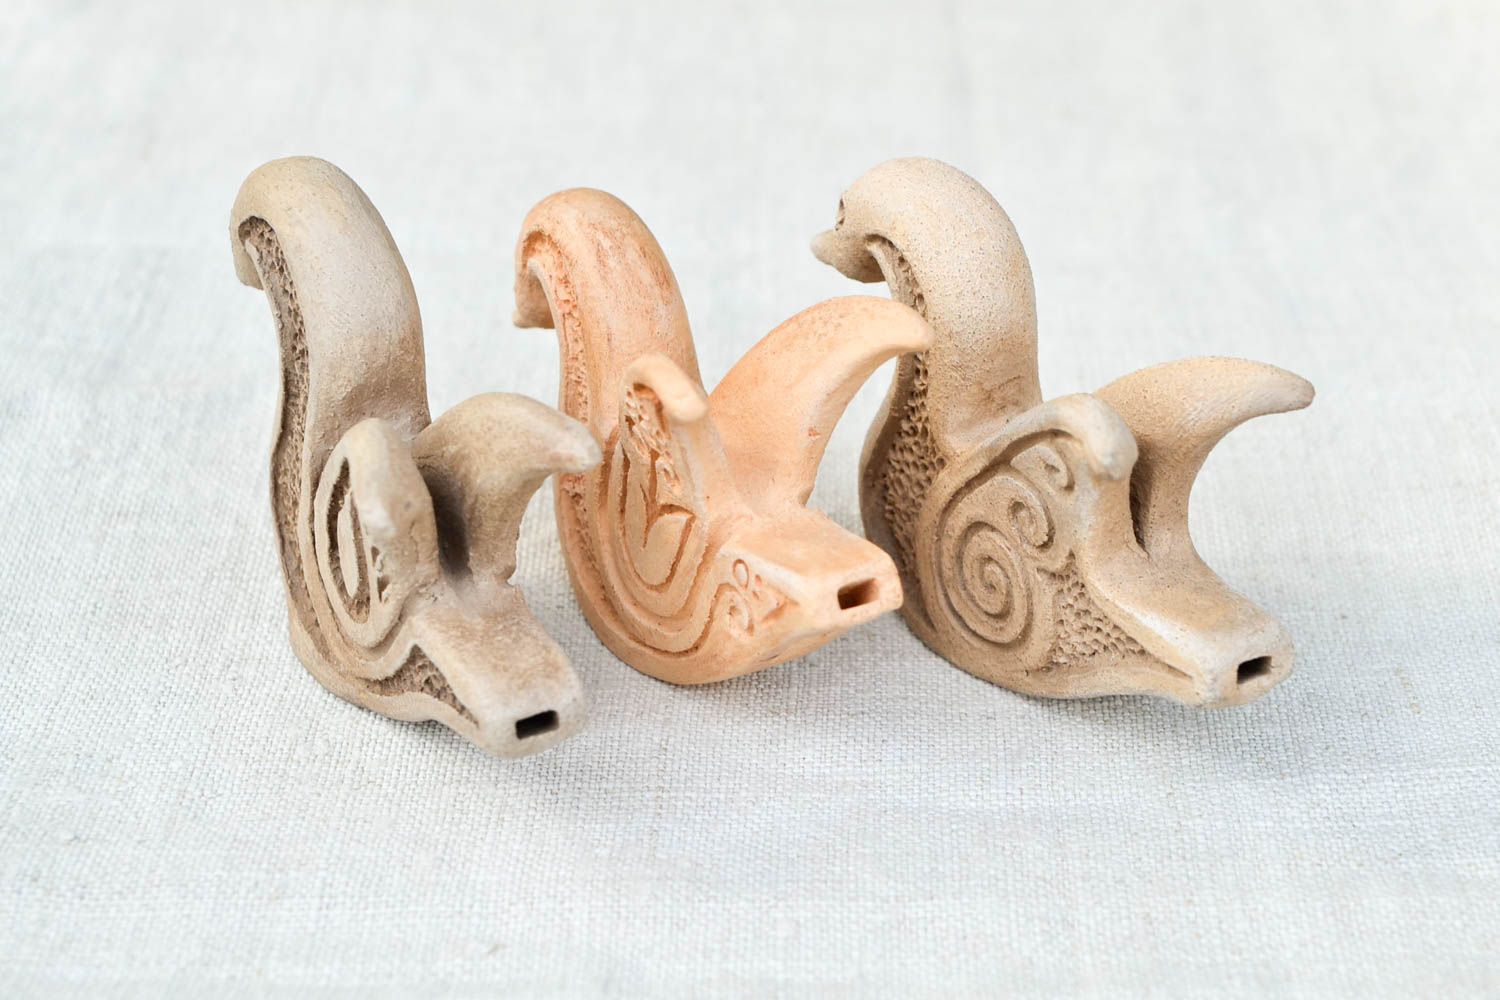 Handmade ceramic penny whistle 3 pieces best gifts for kids sculpture art photo 5